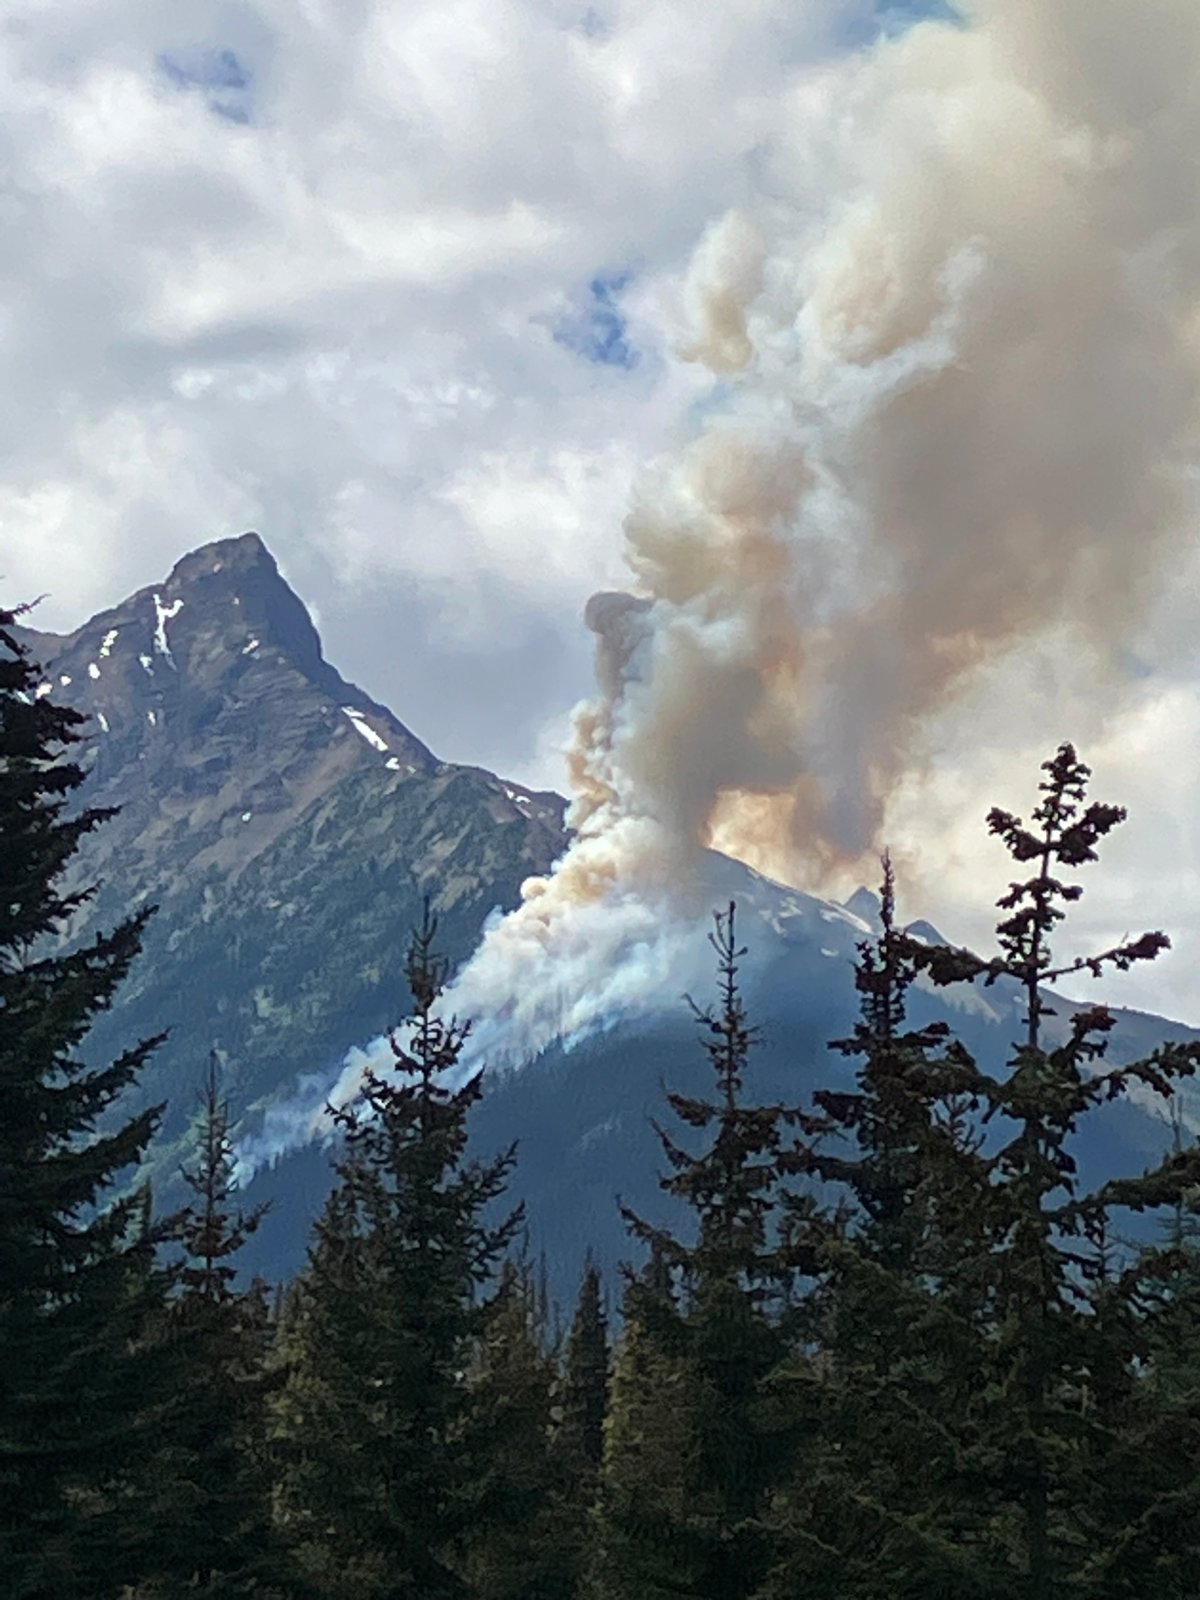 The Sessel Mountain wildfire continues to burn near Pemberton and although it is not threatening any structures or roads, it is highly visible to surrounding communities.